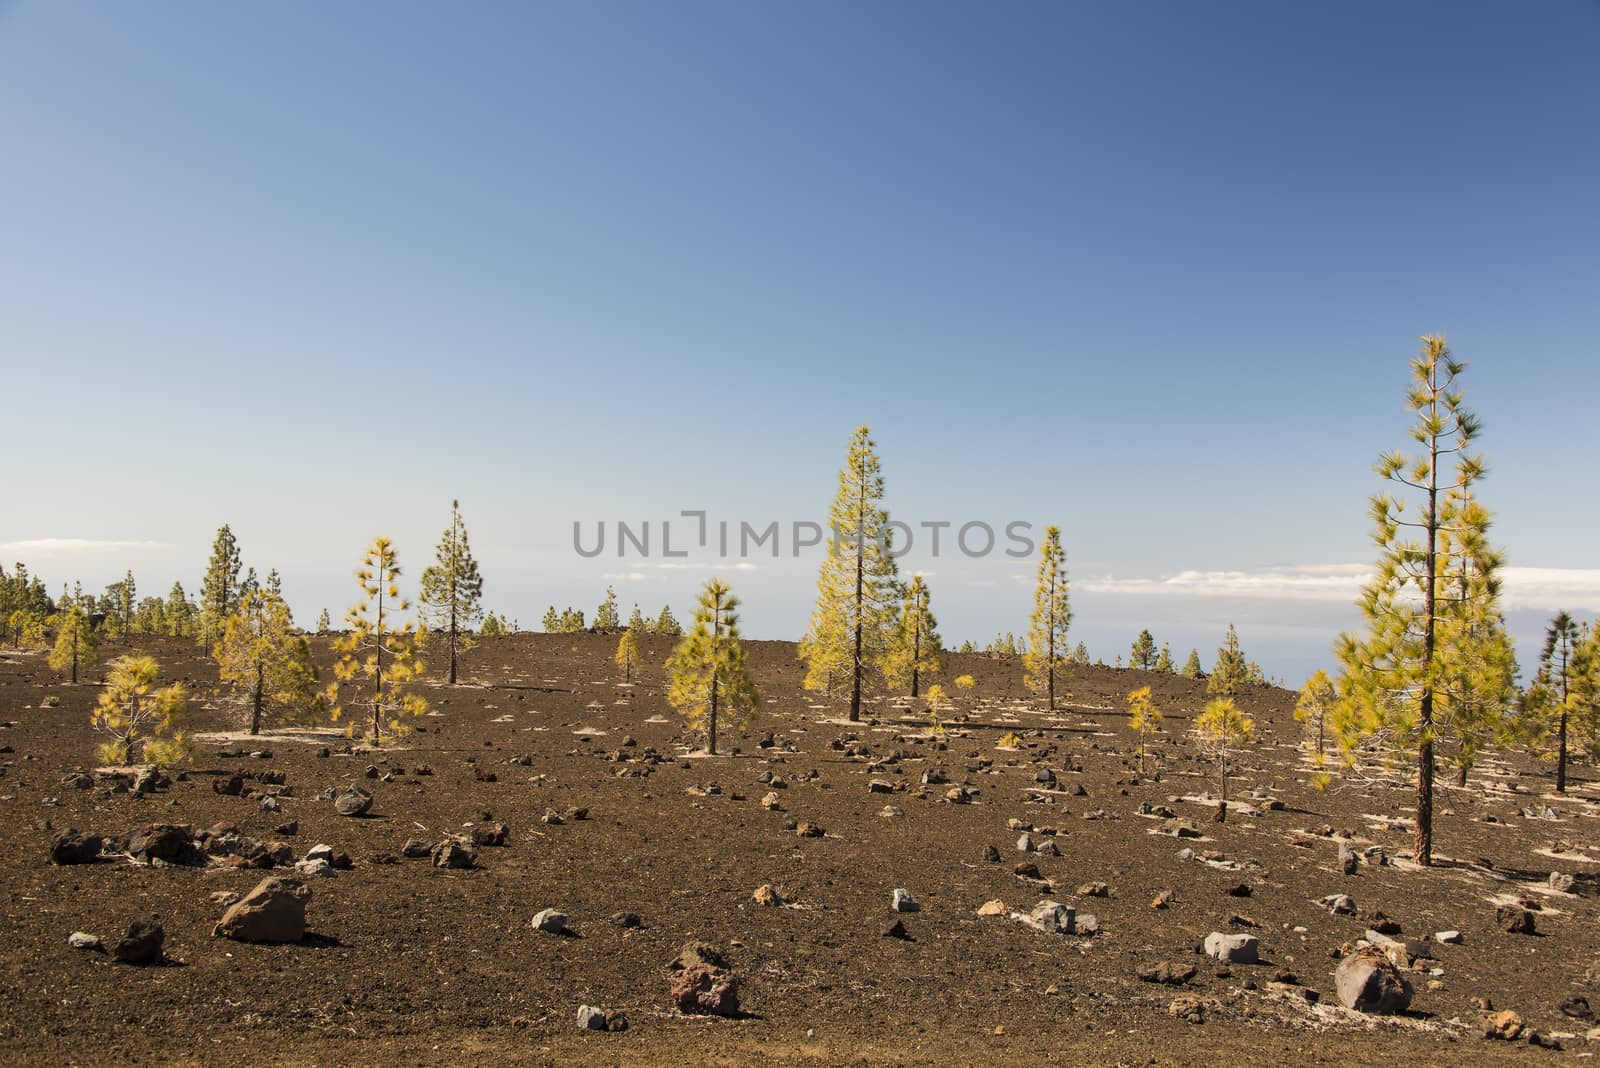 A pine forest in the barren volcanic landscape surrounding the volcano Teide on Tenerife, Canary Islands